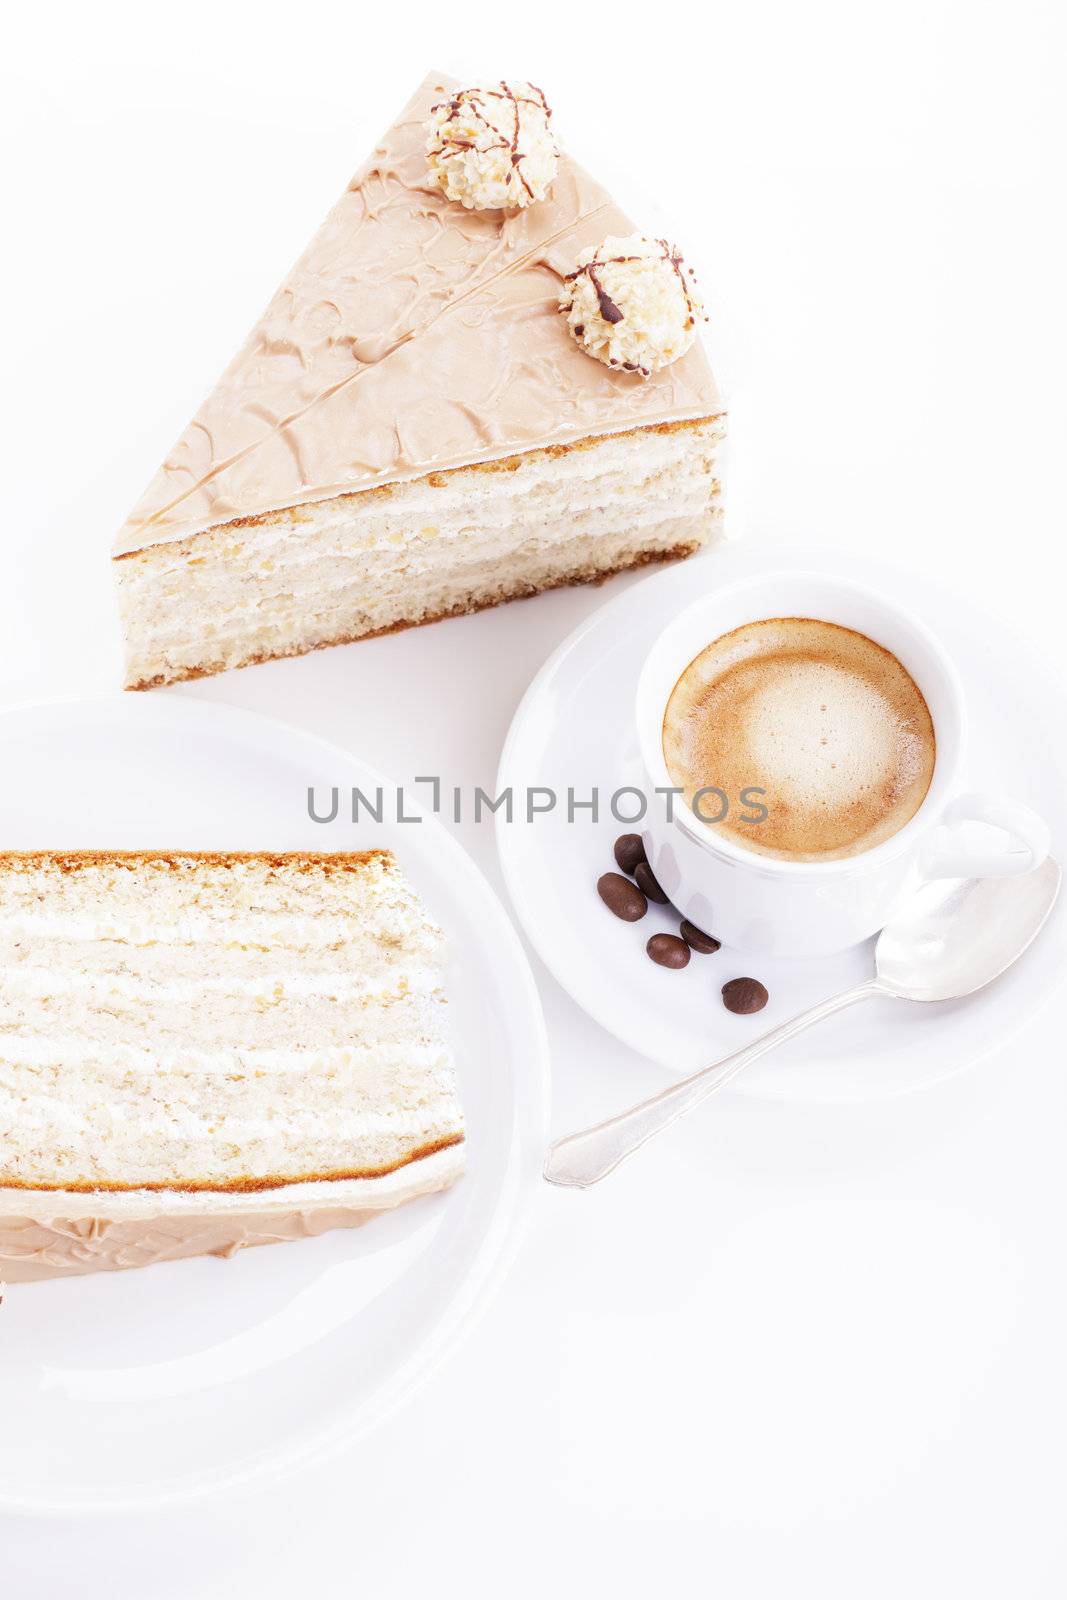 hazelnut cream cake from top with a cup of coffee on white background